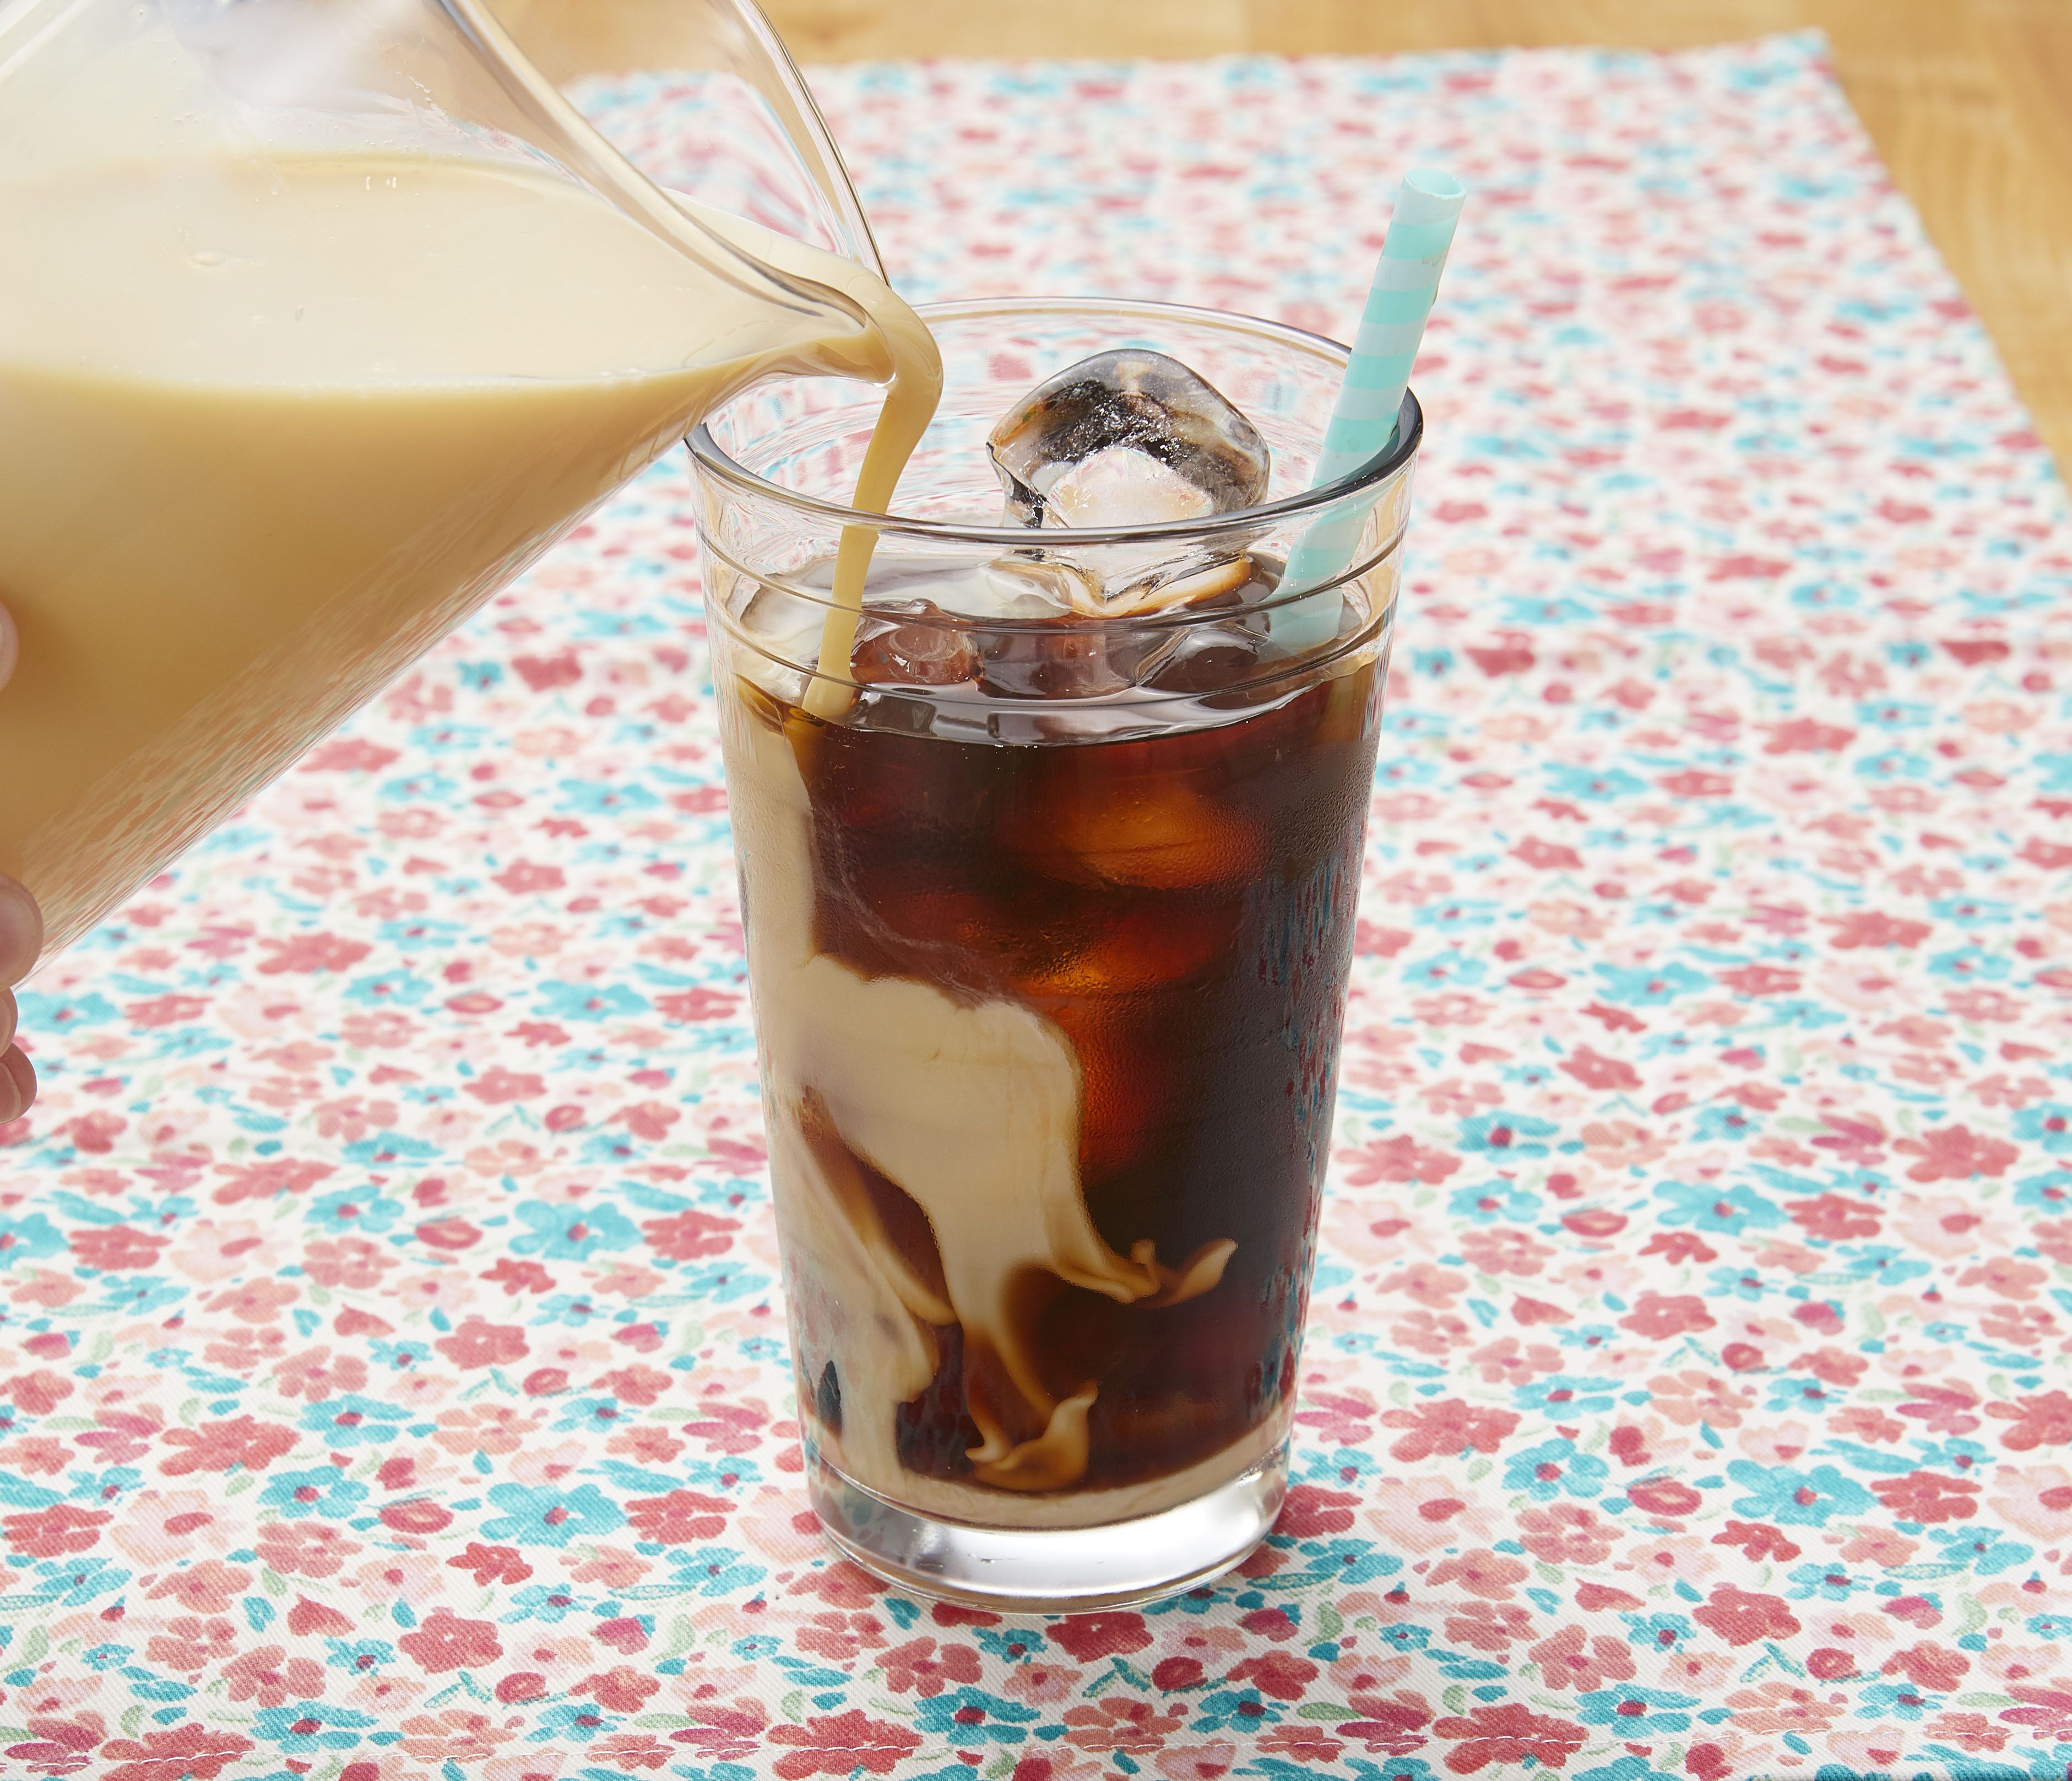 How Long Can You Keep Iced Coffee in the Fridge?